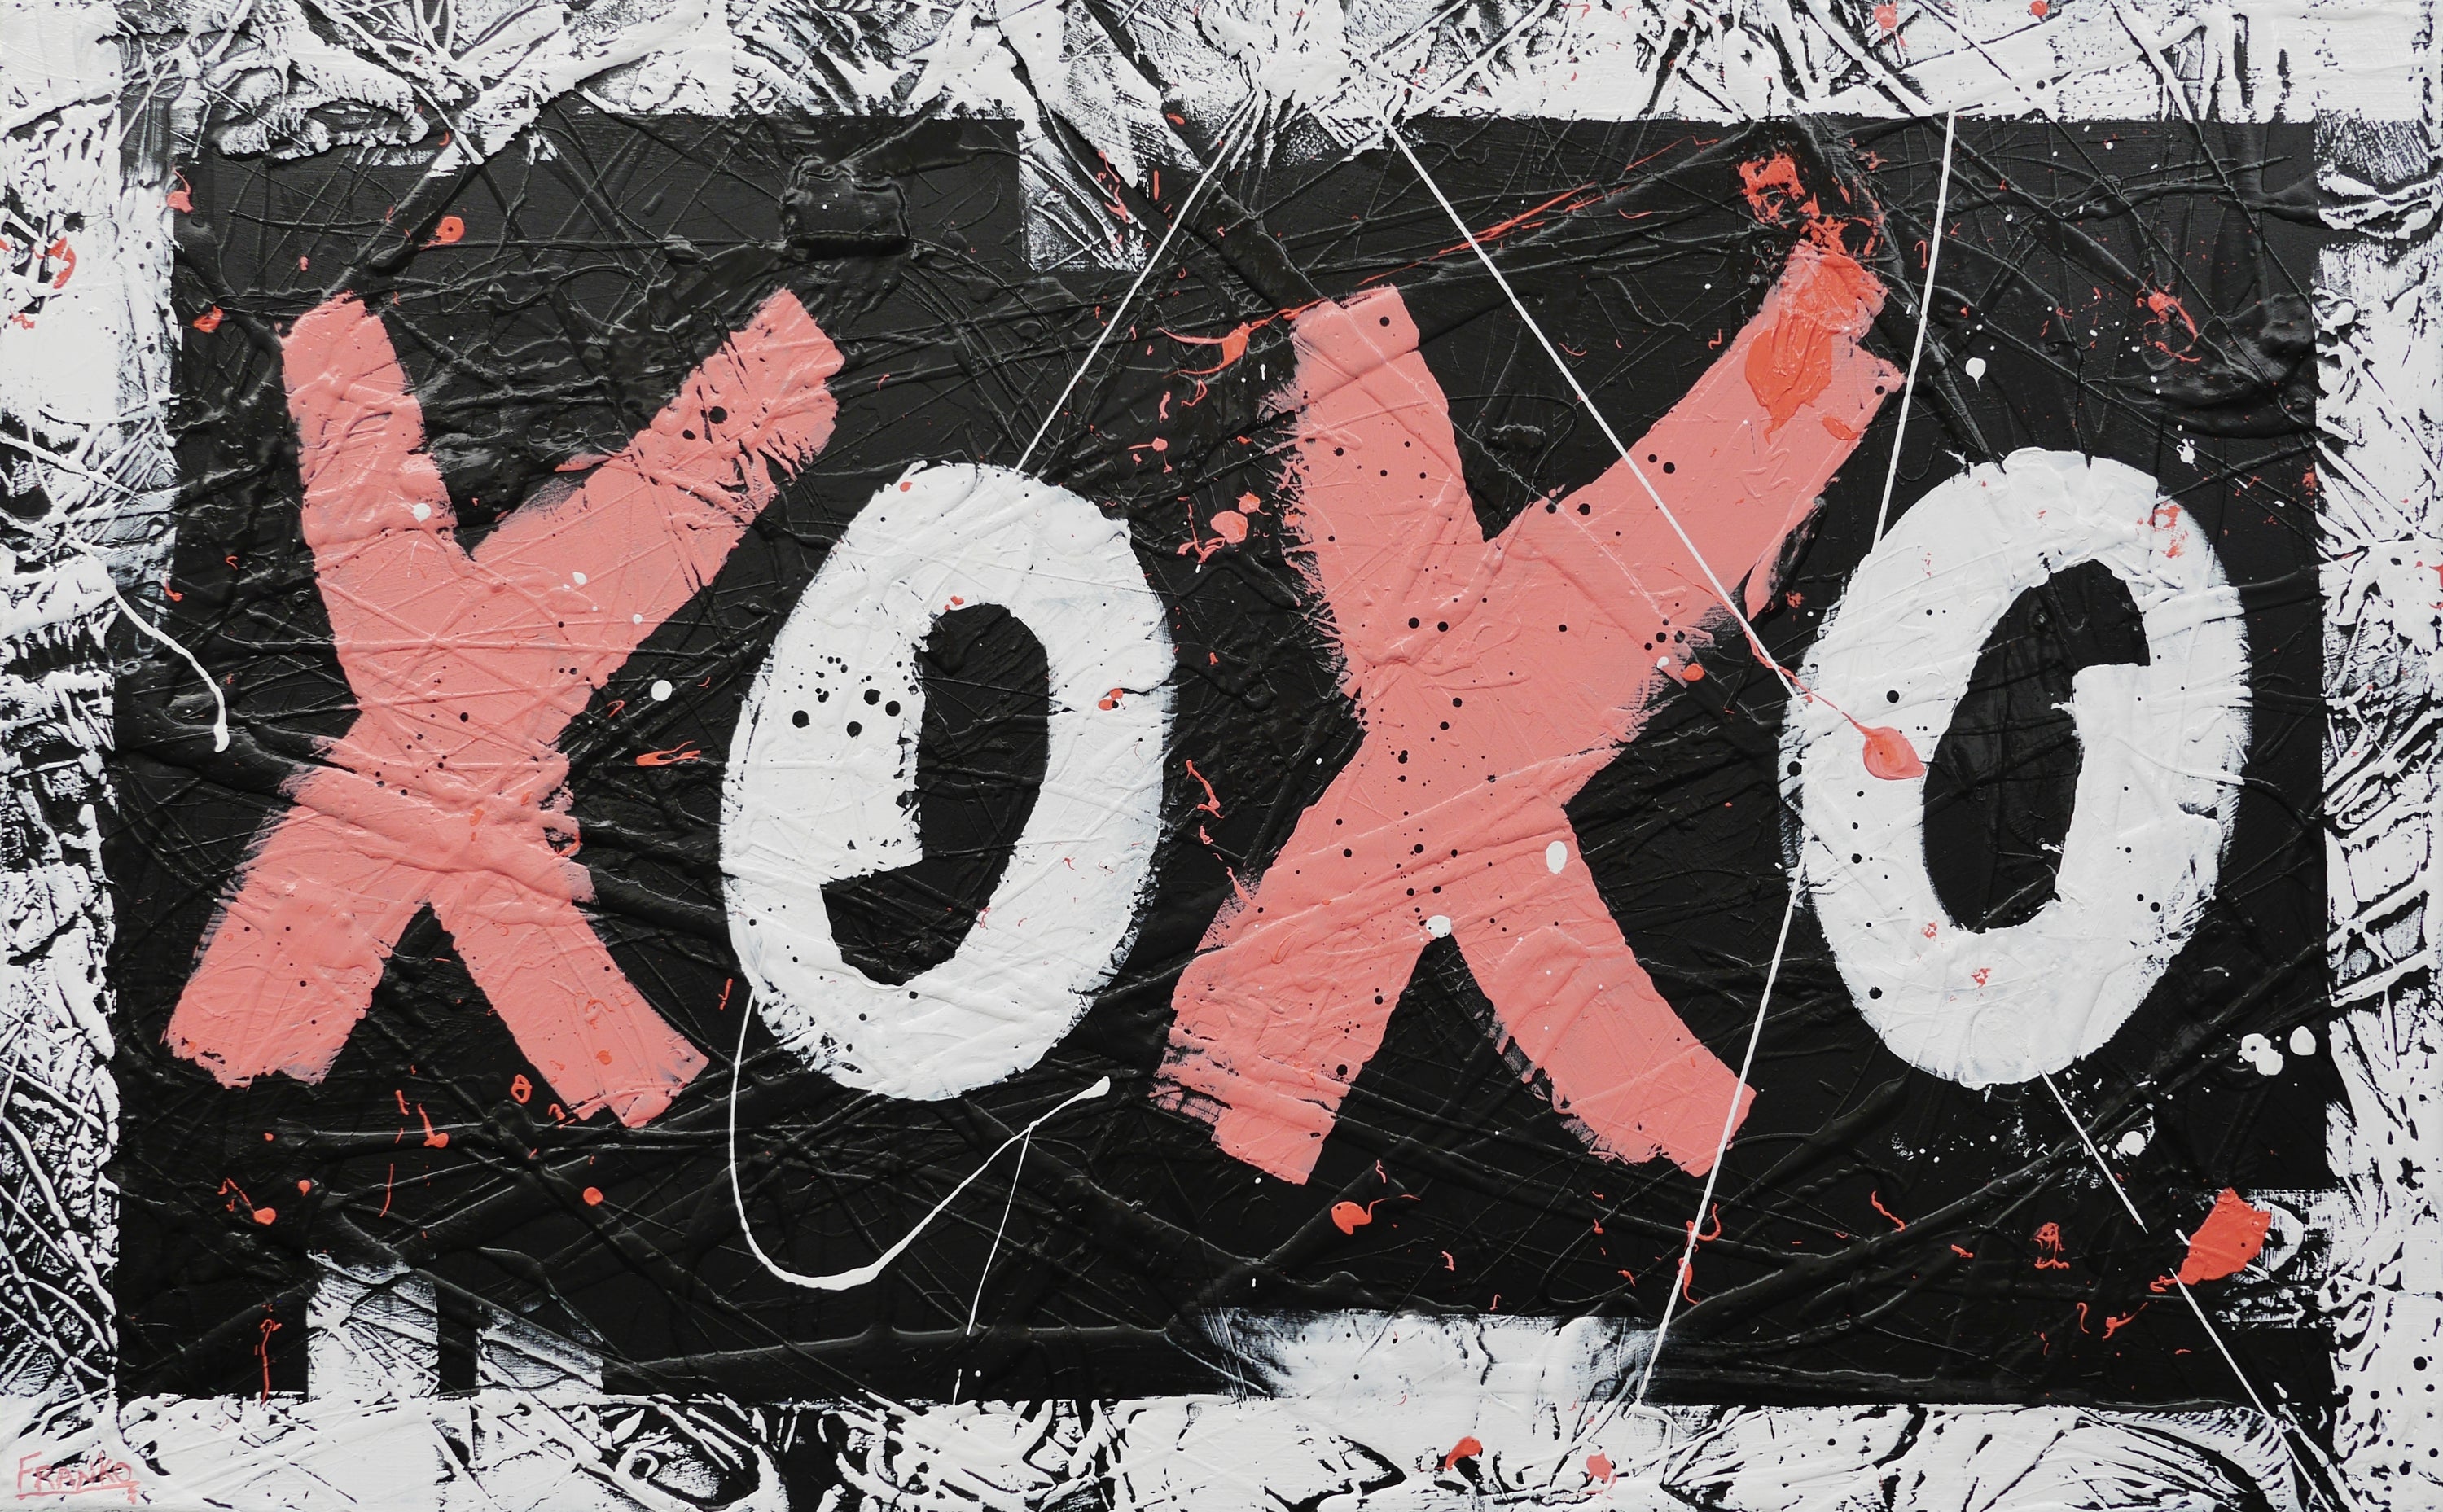 XO Free Love 160cm x 100cm Hugs and Kisses Textured Pop Art Painting (SOLD)